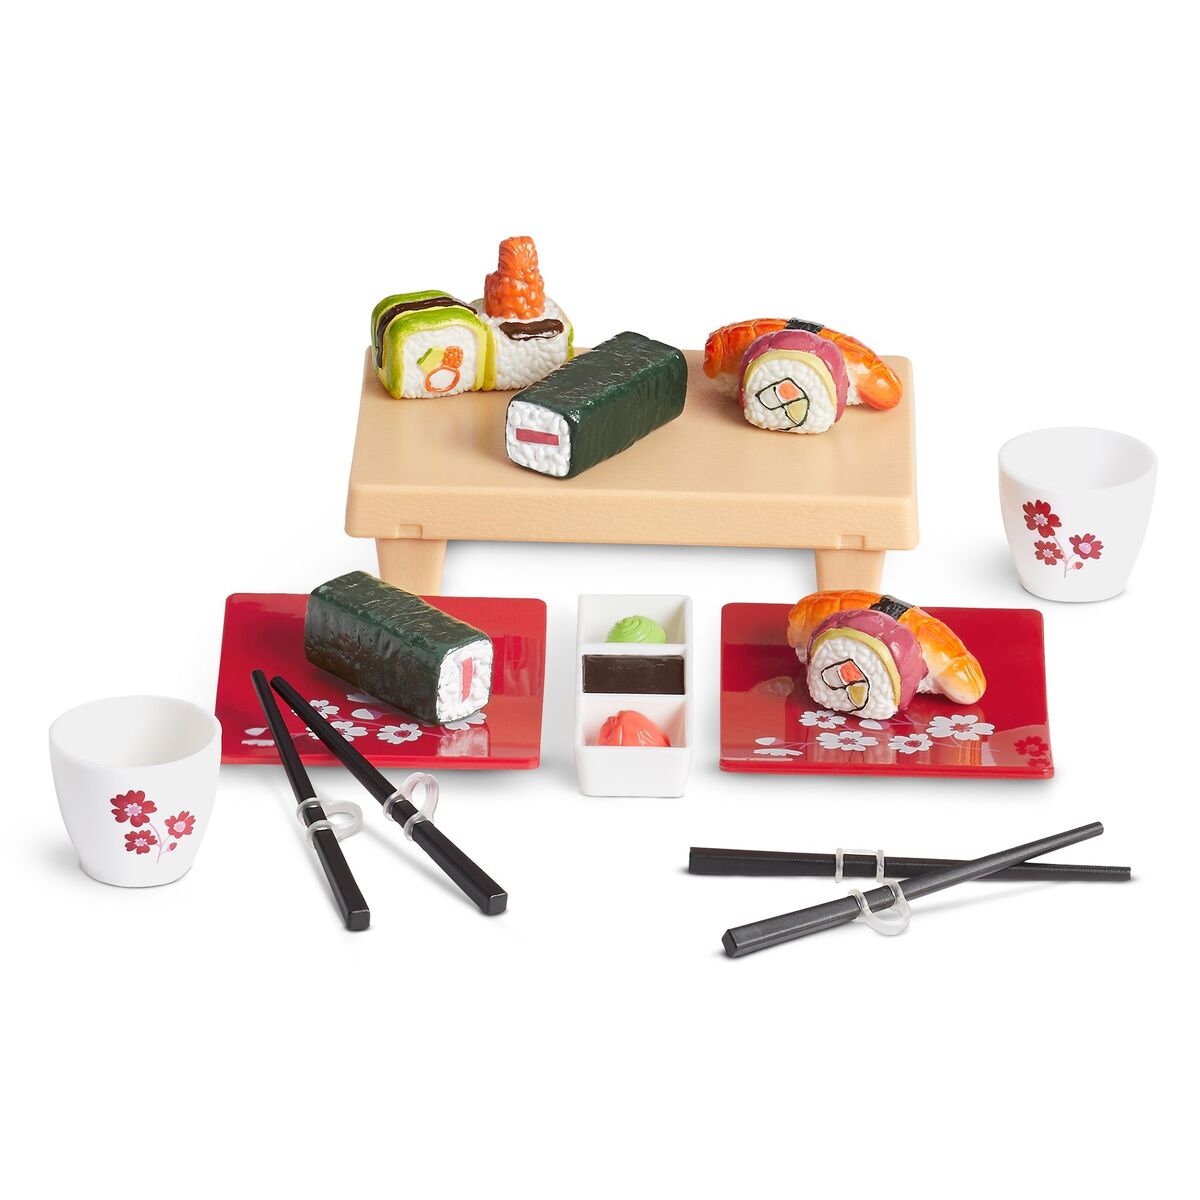 Sushi Restaurant American Girl and Wellie Wishers Doll Food